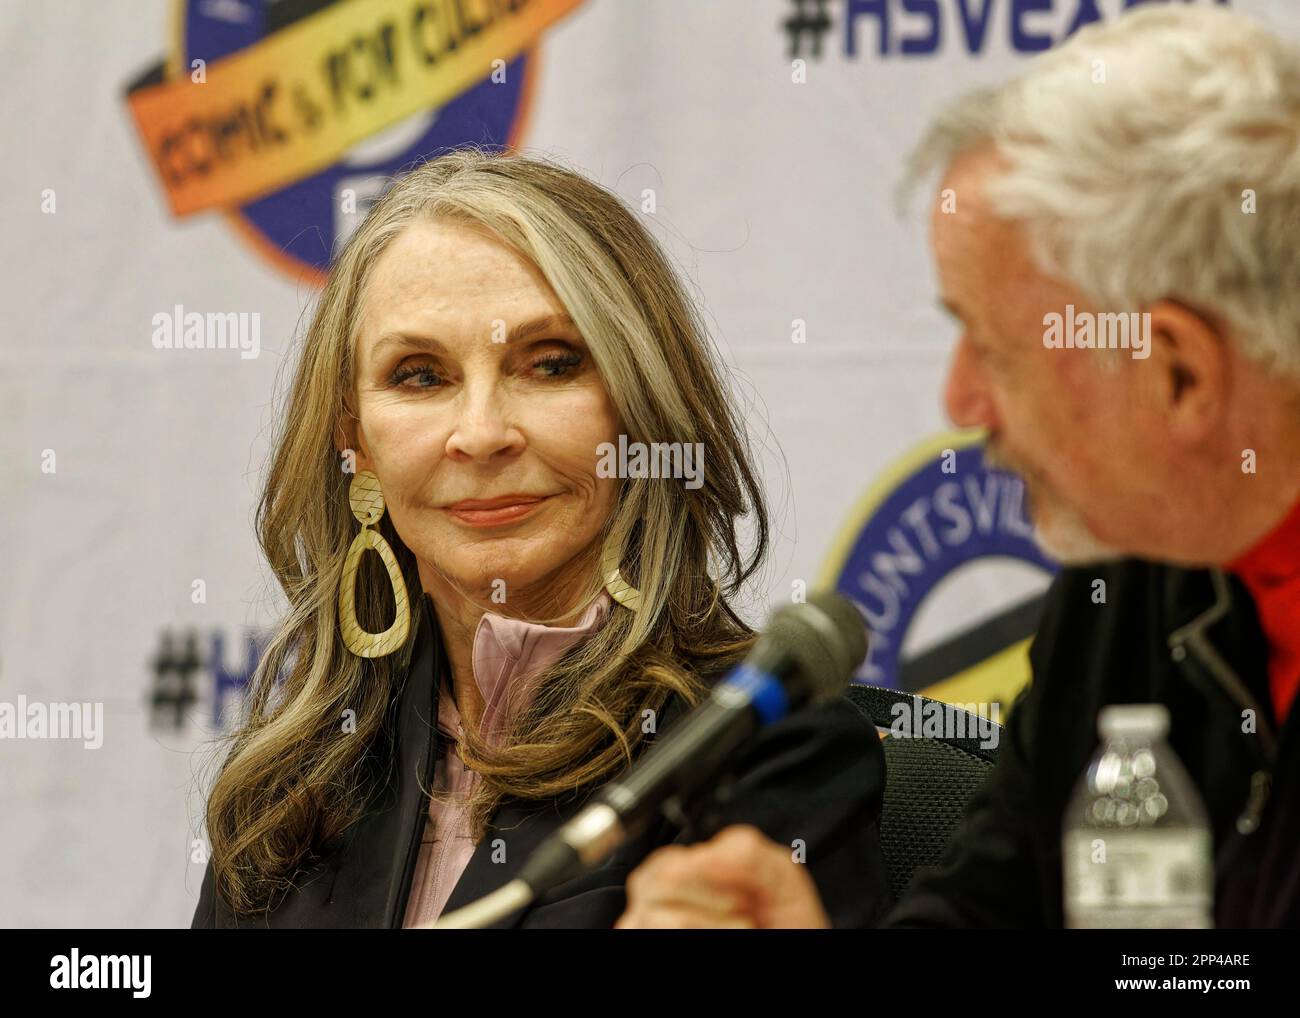 Huntsville, Alabama, USA. 21 Apr 2023. Star Trek actress Gates McFadden (left) smiles while listening to castmate John de Lancie during a Star Trek: The Next Generation panel on the first day of the 2023 Huntsville Comic & Pop Culture Expo on Friday, April 21, 2023 at the Von Braun Center in Huntsville, Madison County, AL, USA. McFadden, 74, most recently reprised her role as 'Dr. Beverly Crusher' in the Star Trek: Picard series finale which premiered the day before this appearance. (Credit: Billy Suratt/Apex MediaWire via Alamy Live News) Stock Photo